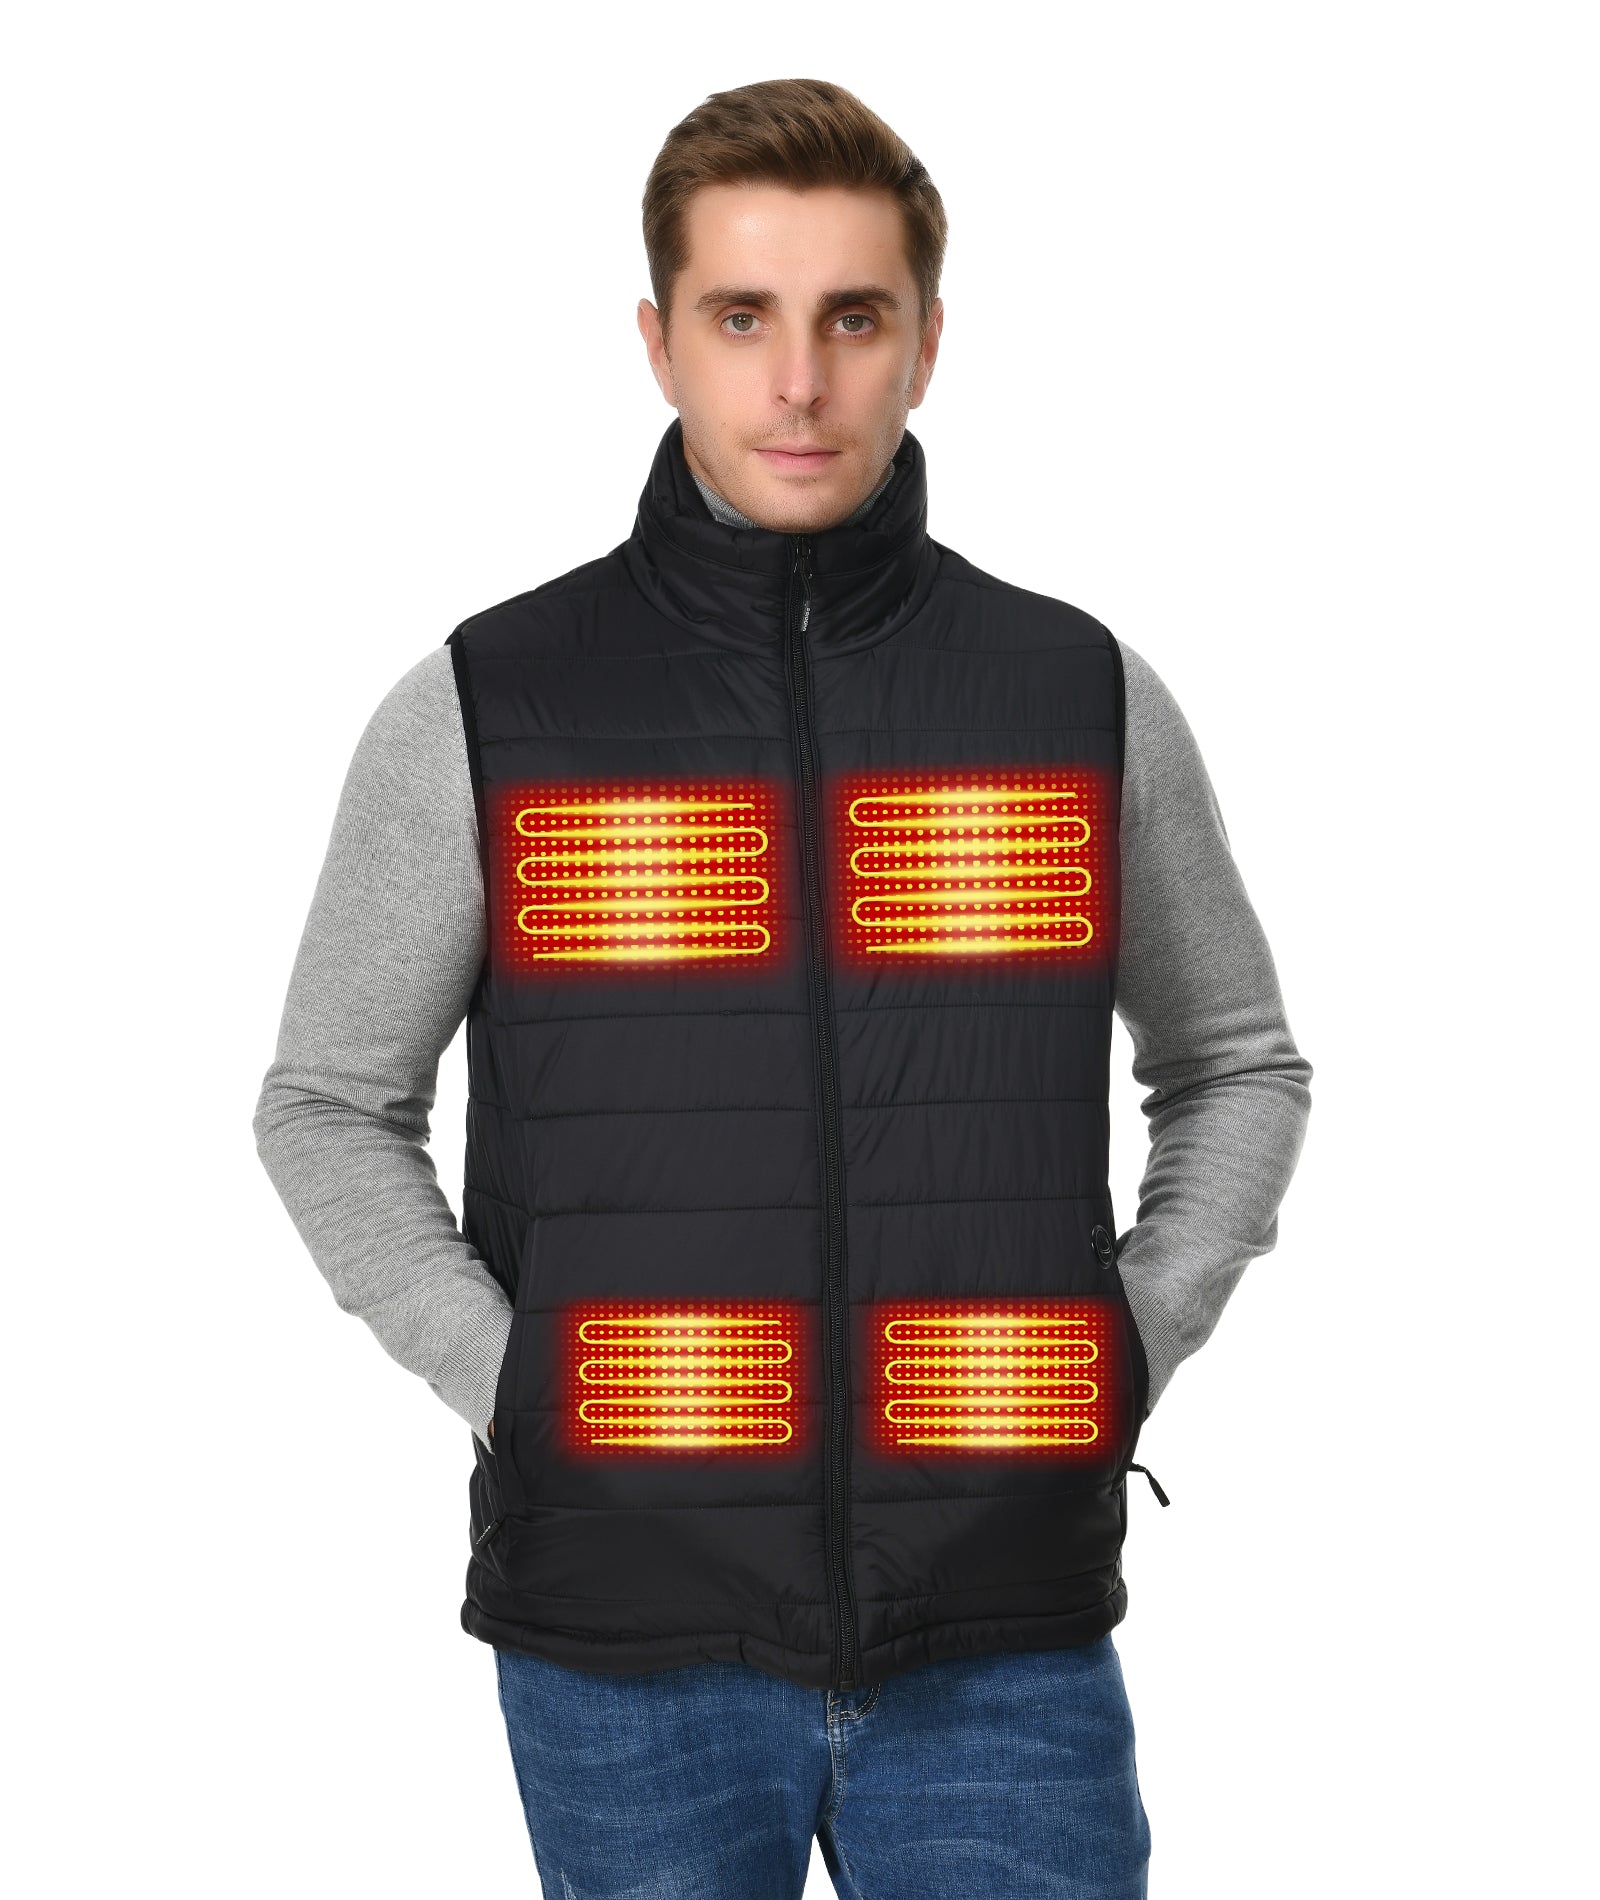 2022 uupalee Heated Vest for Men with Battery Pack – UUPALEE